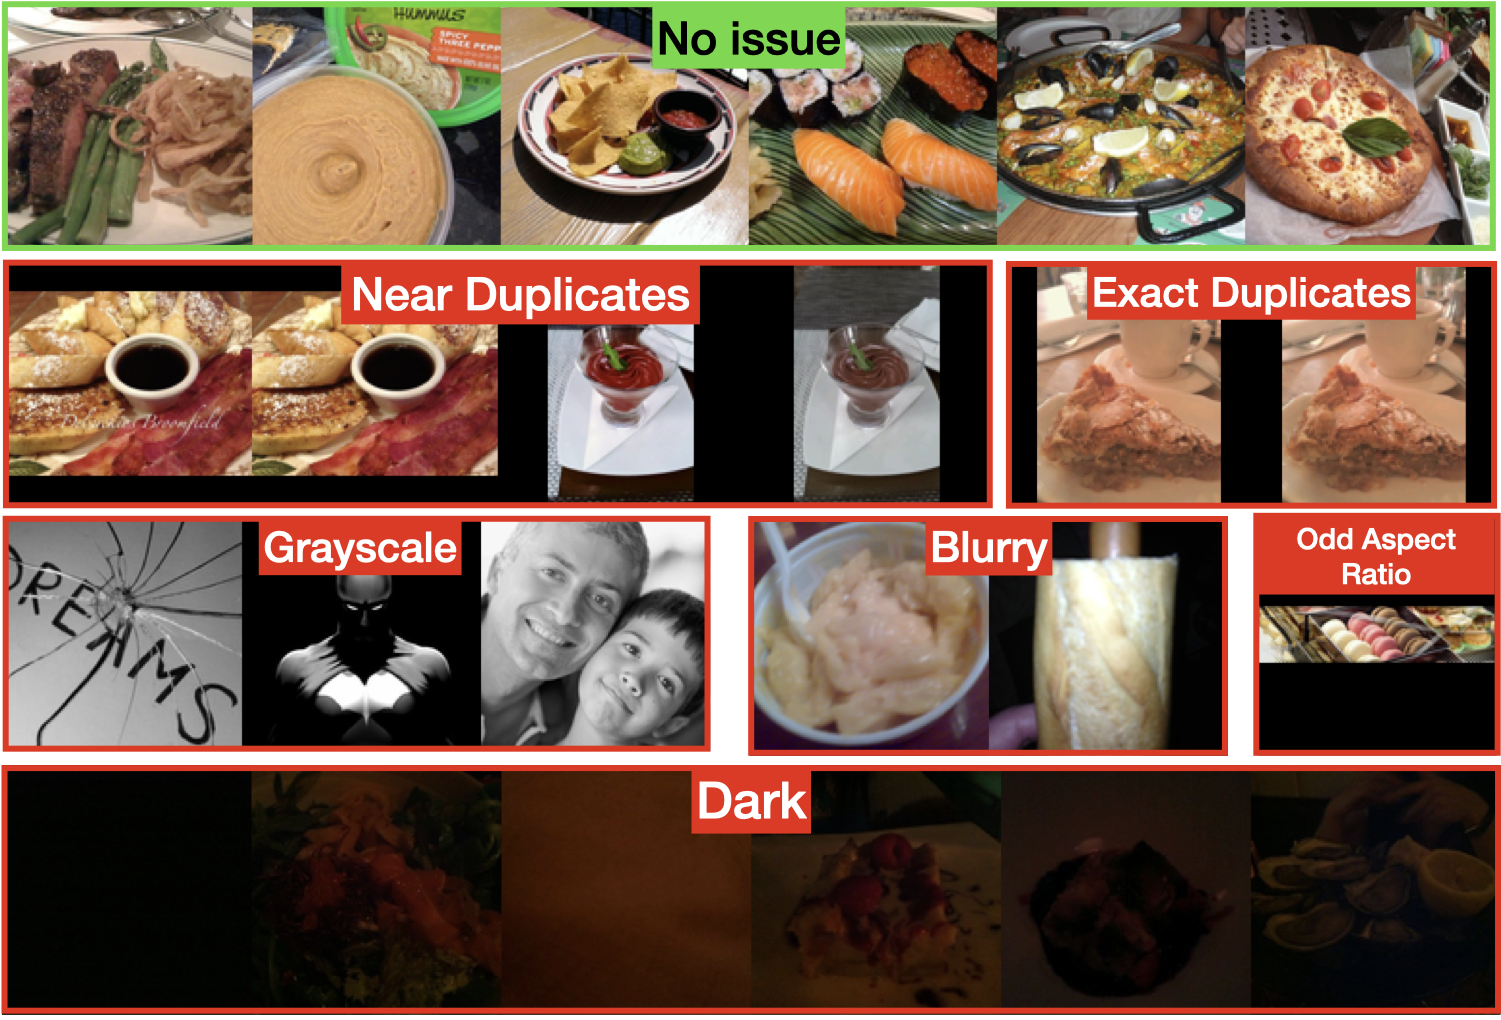 Issues in the Food-101 dataset